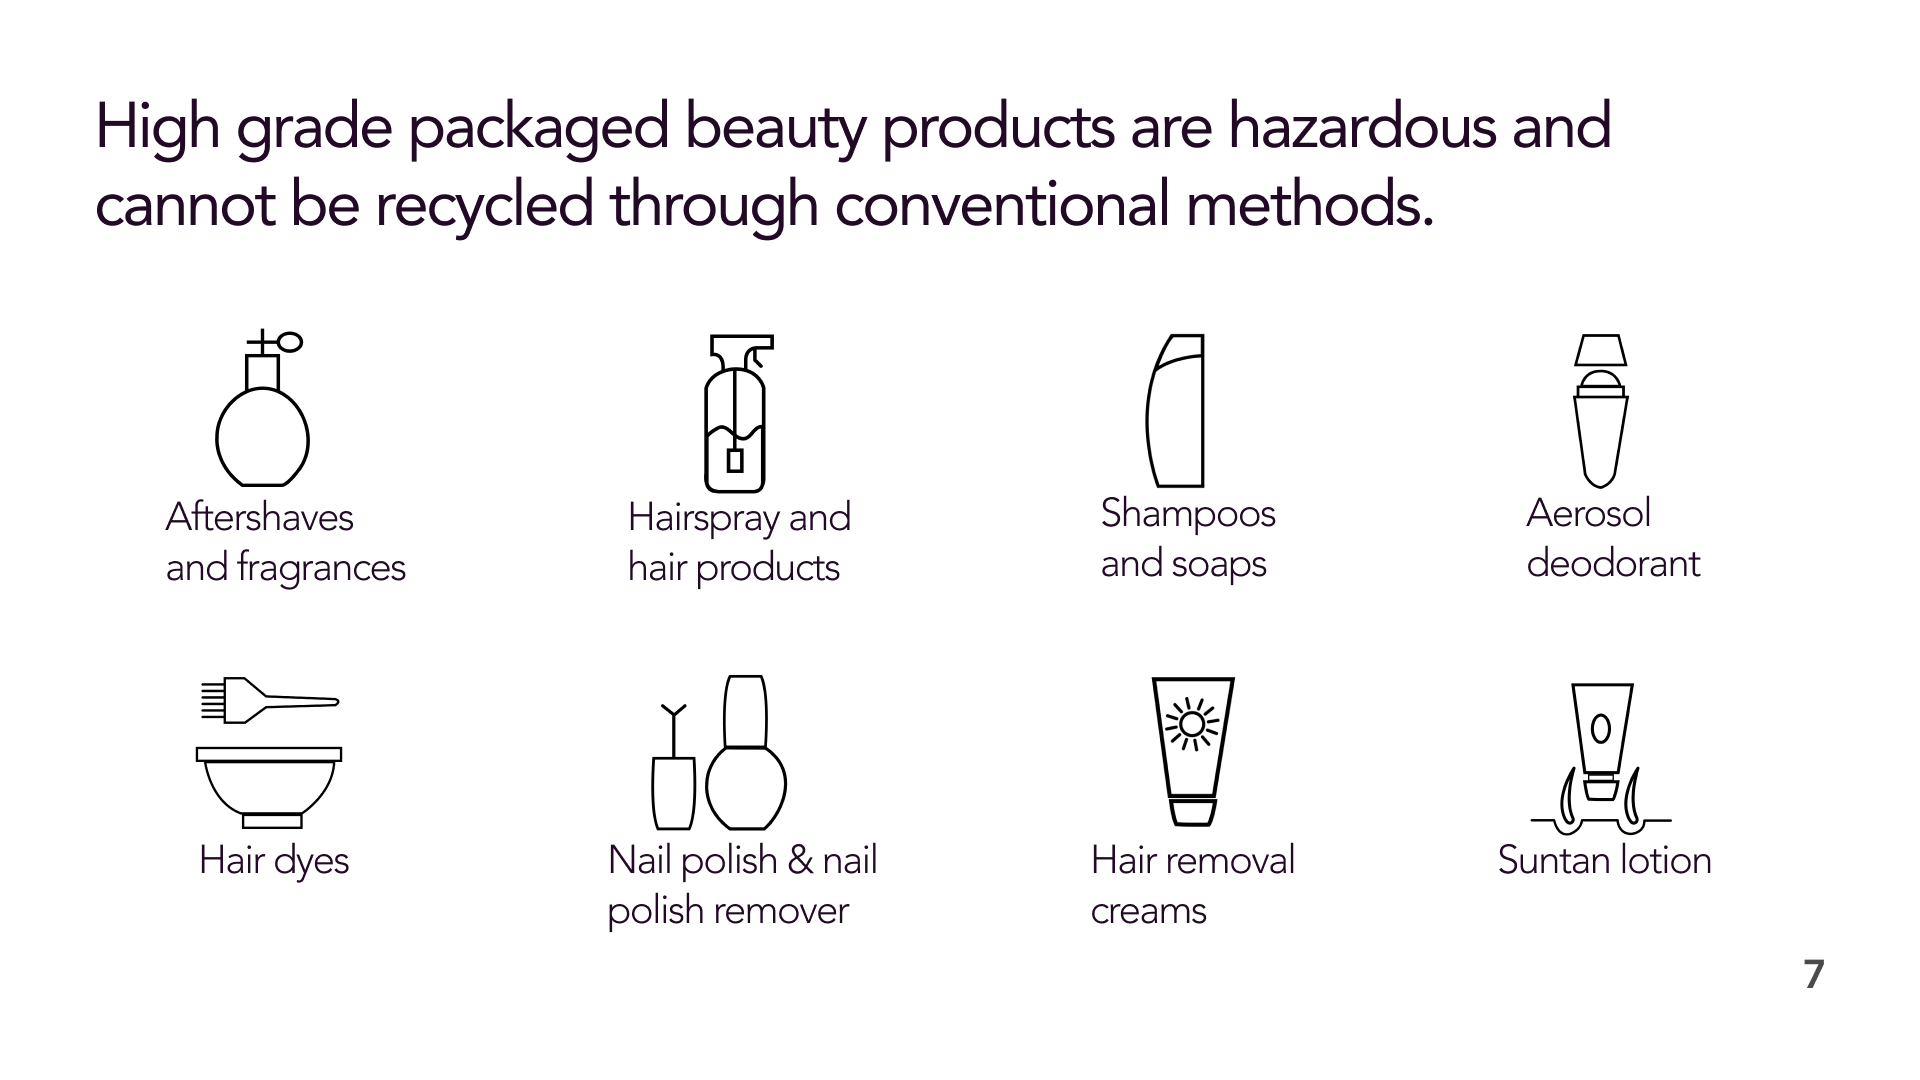 Types of packaging waste from beauty products